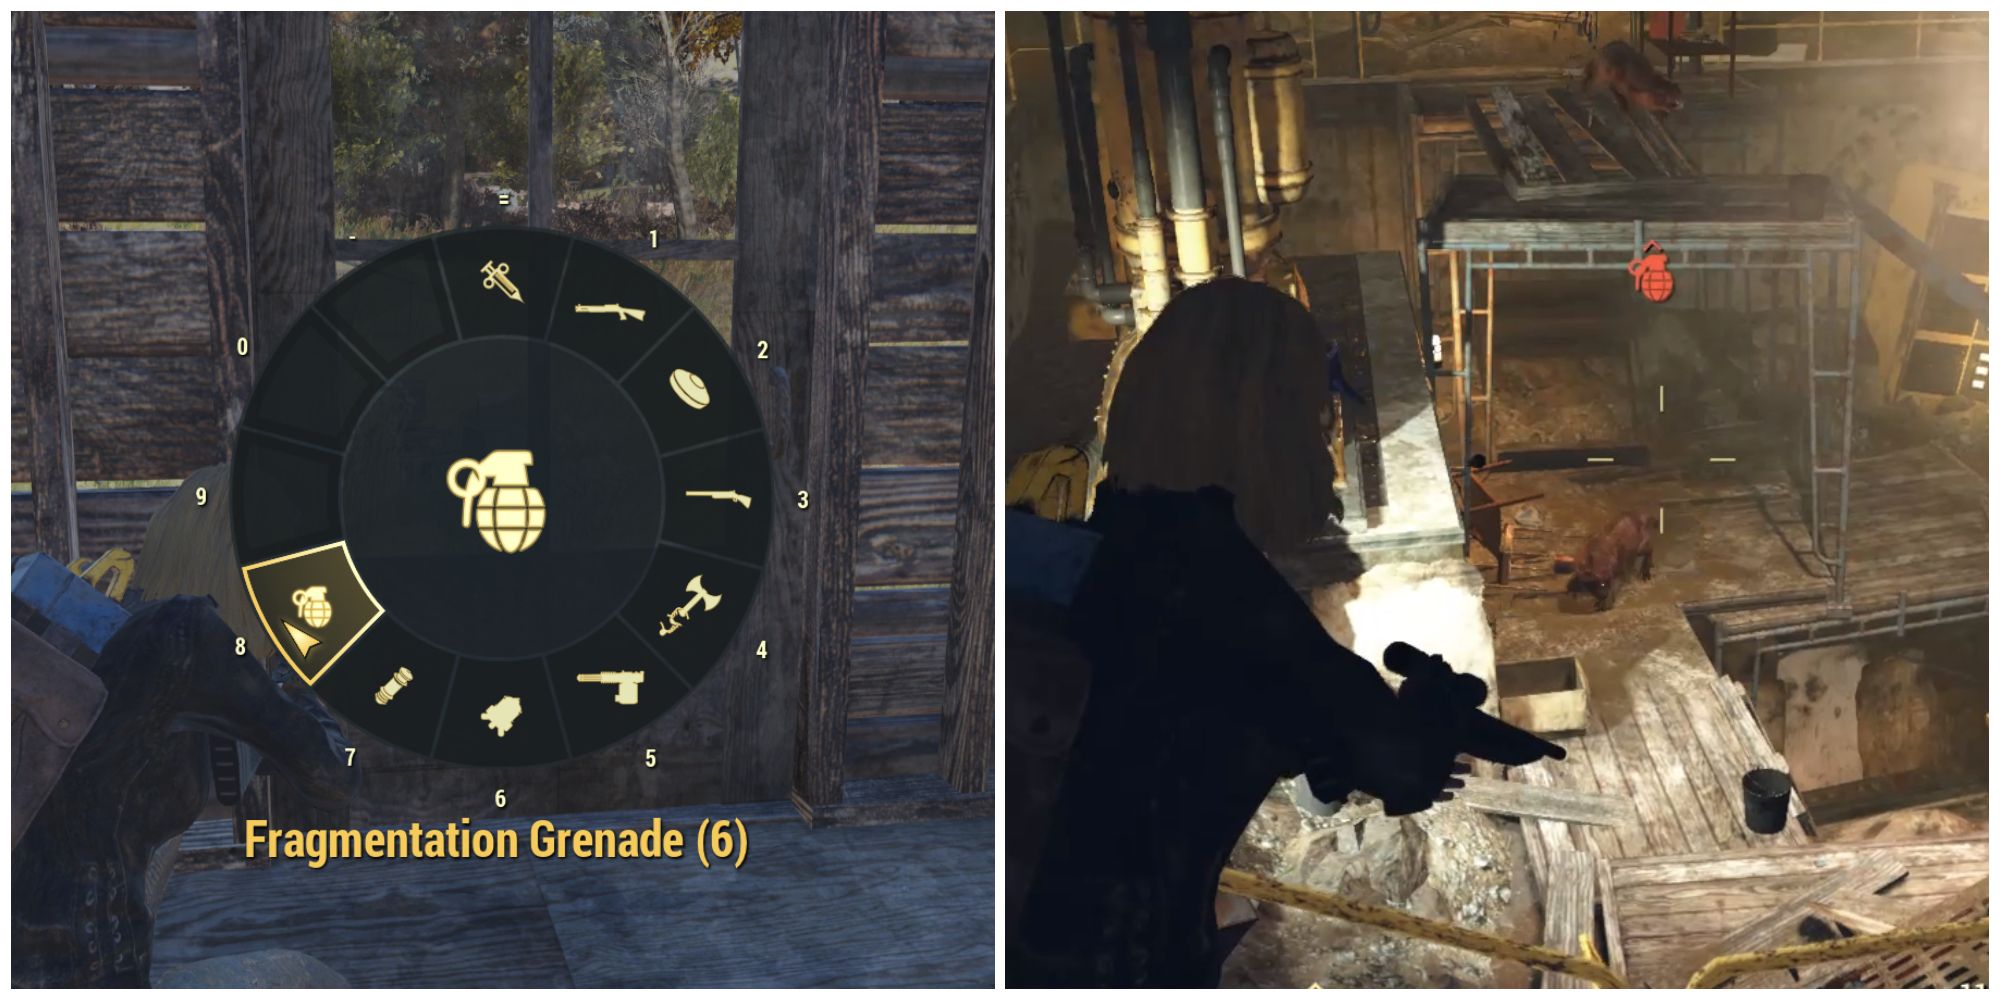 Split image of Fragmentation Grenades in the quick selection wheel and a character throwing a grenade in Fallout 76